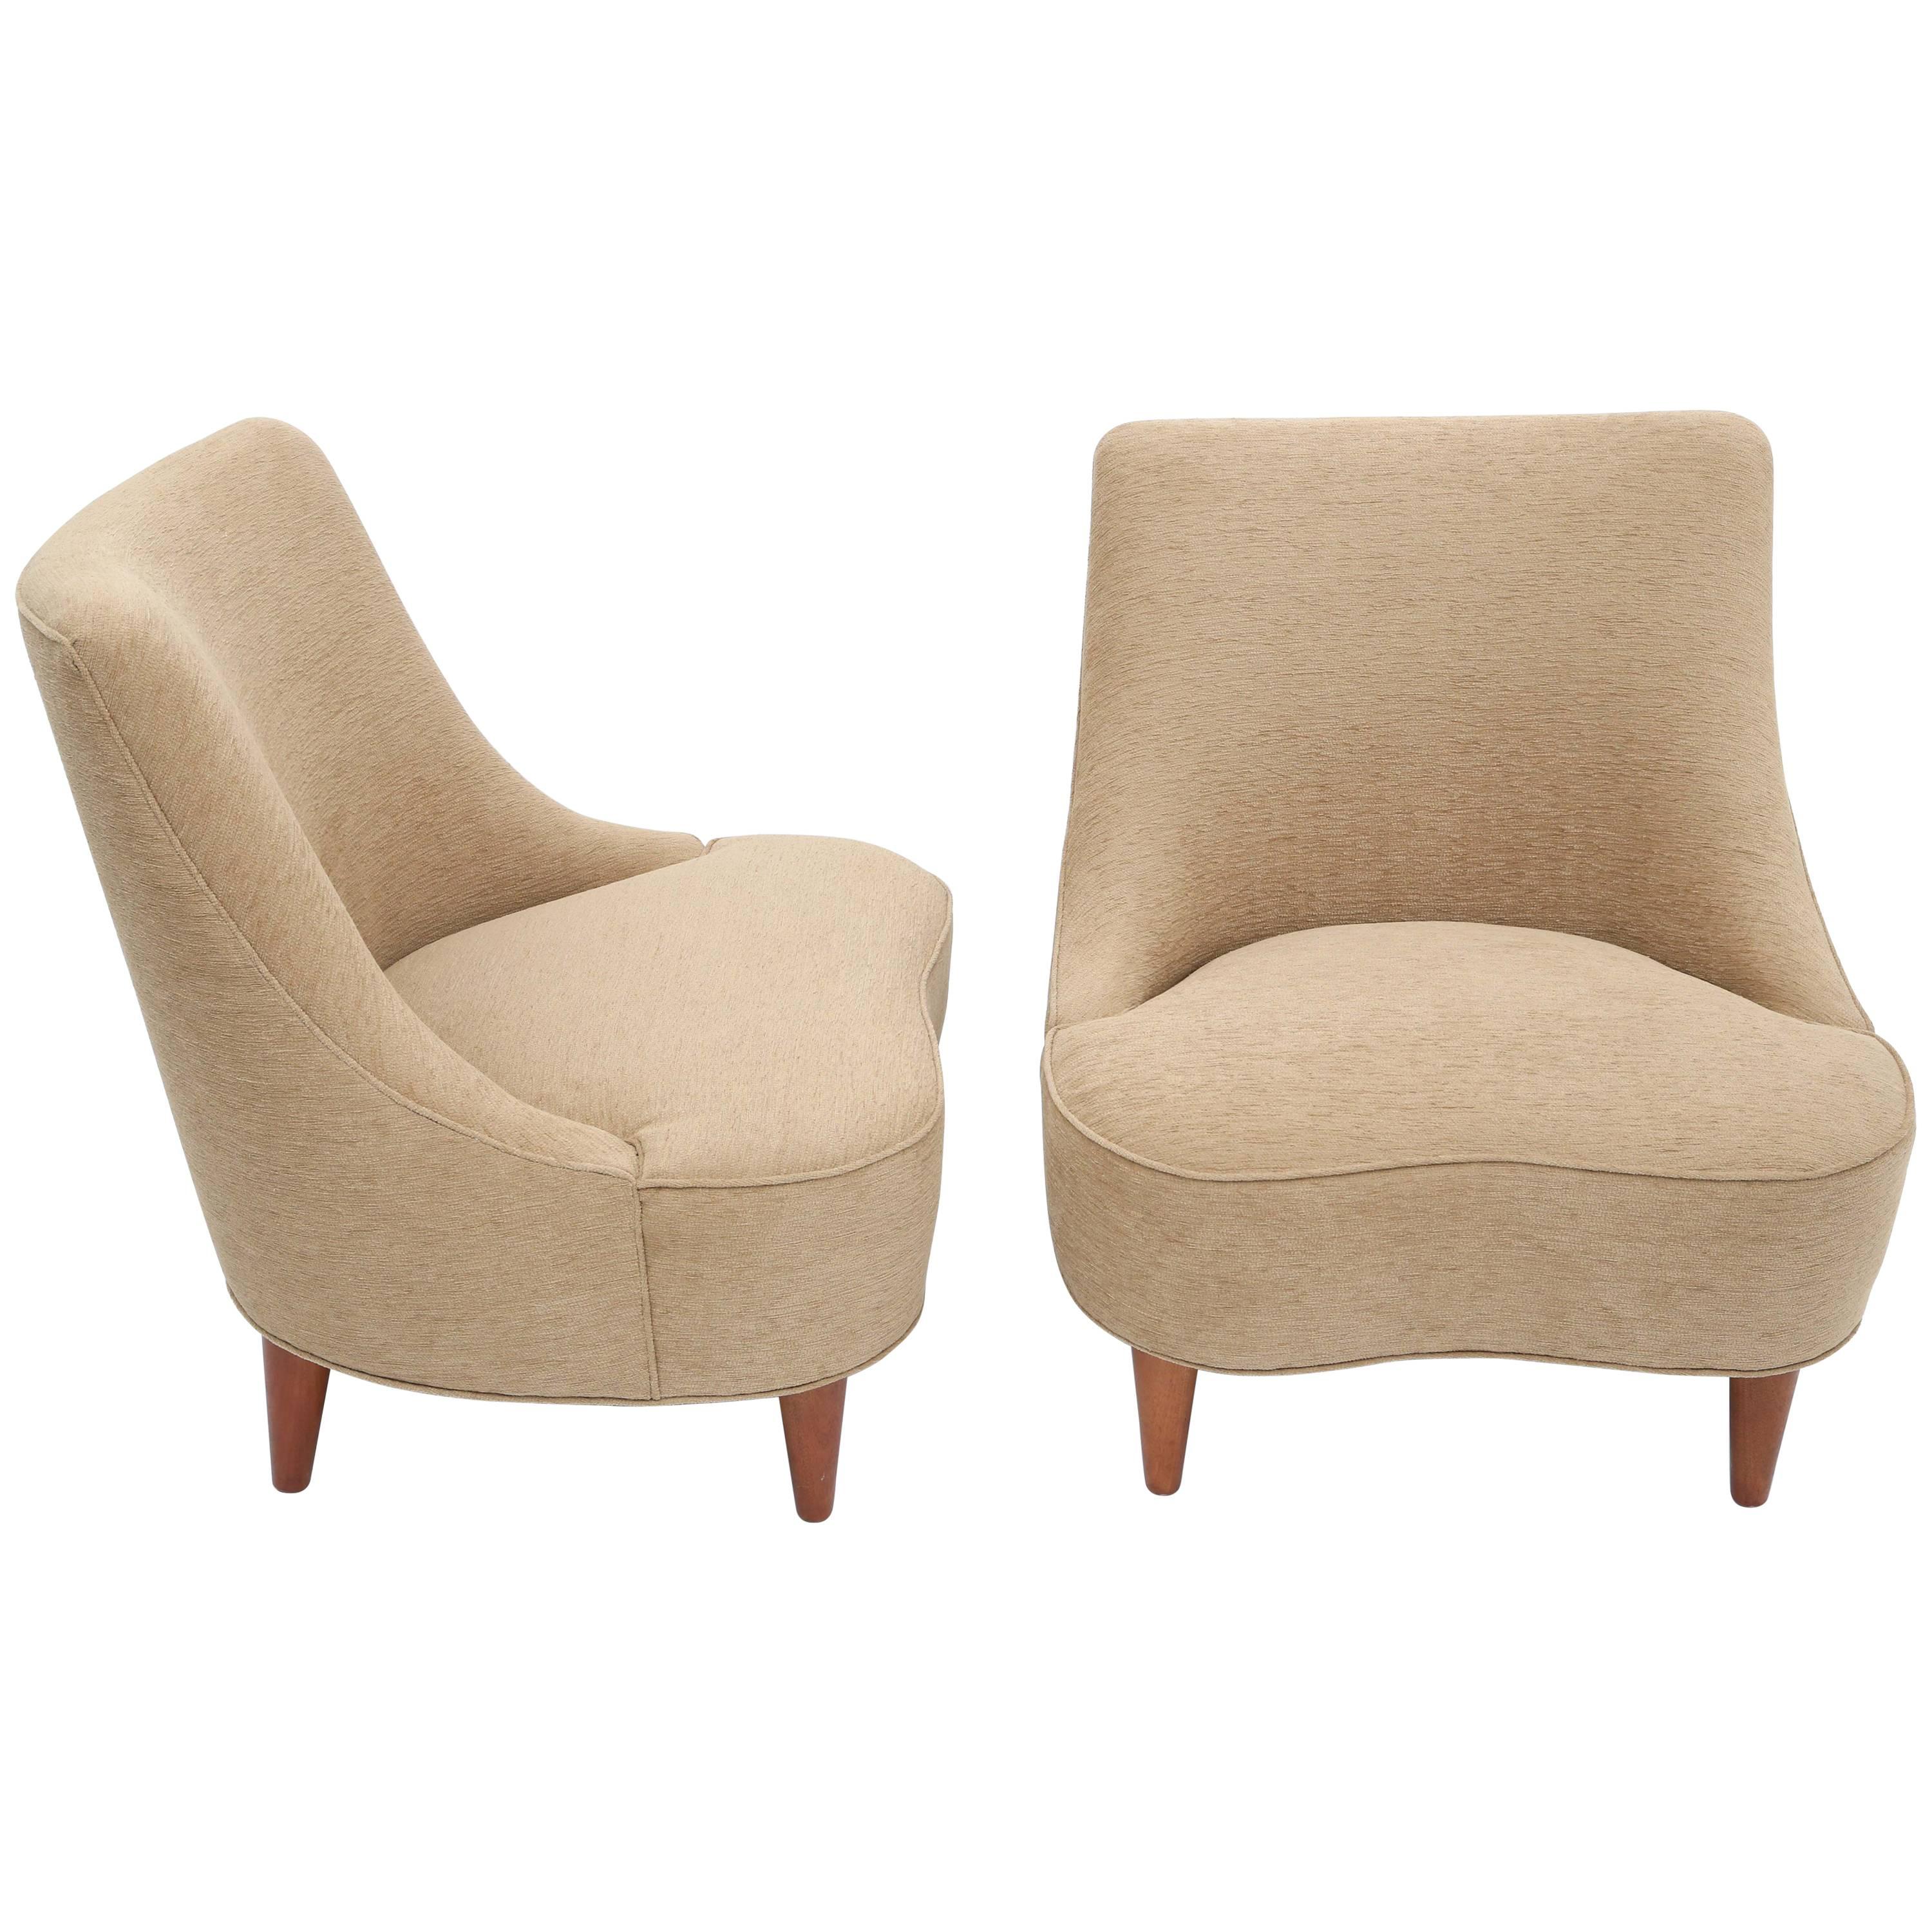 Edward Wormley Tear Drop Lounge Chairs For Sale